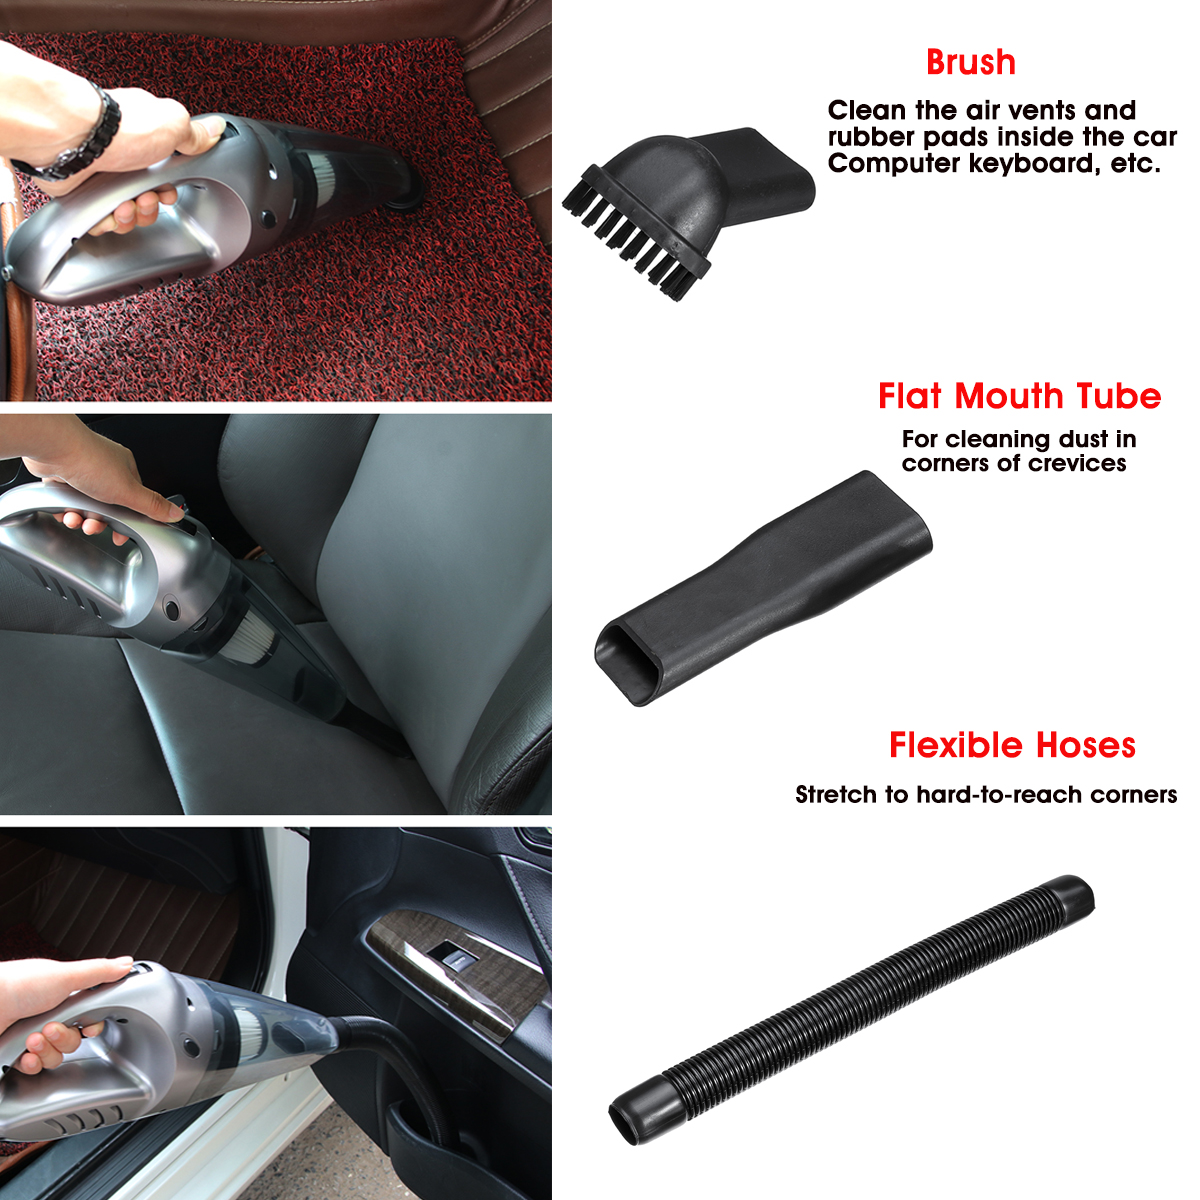 120W-Portable-Auto-Car-Handheld-Vacuum-Cleaner-Duster-Wet--Dry-Dirt-Suction-with-LED-Light-1624459-7